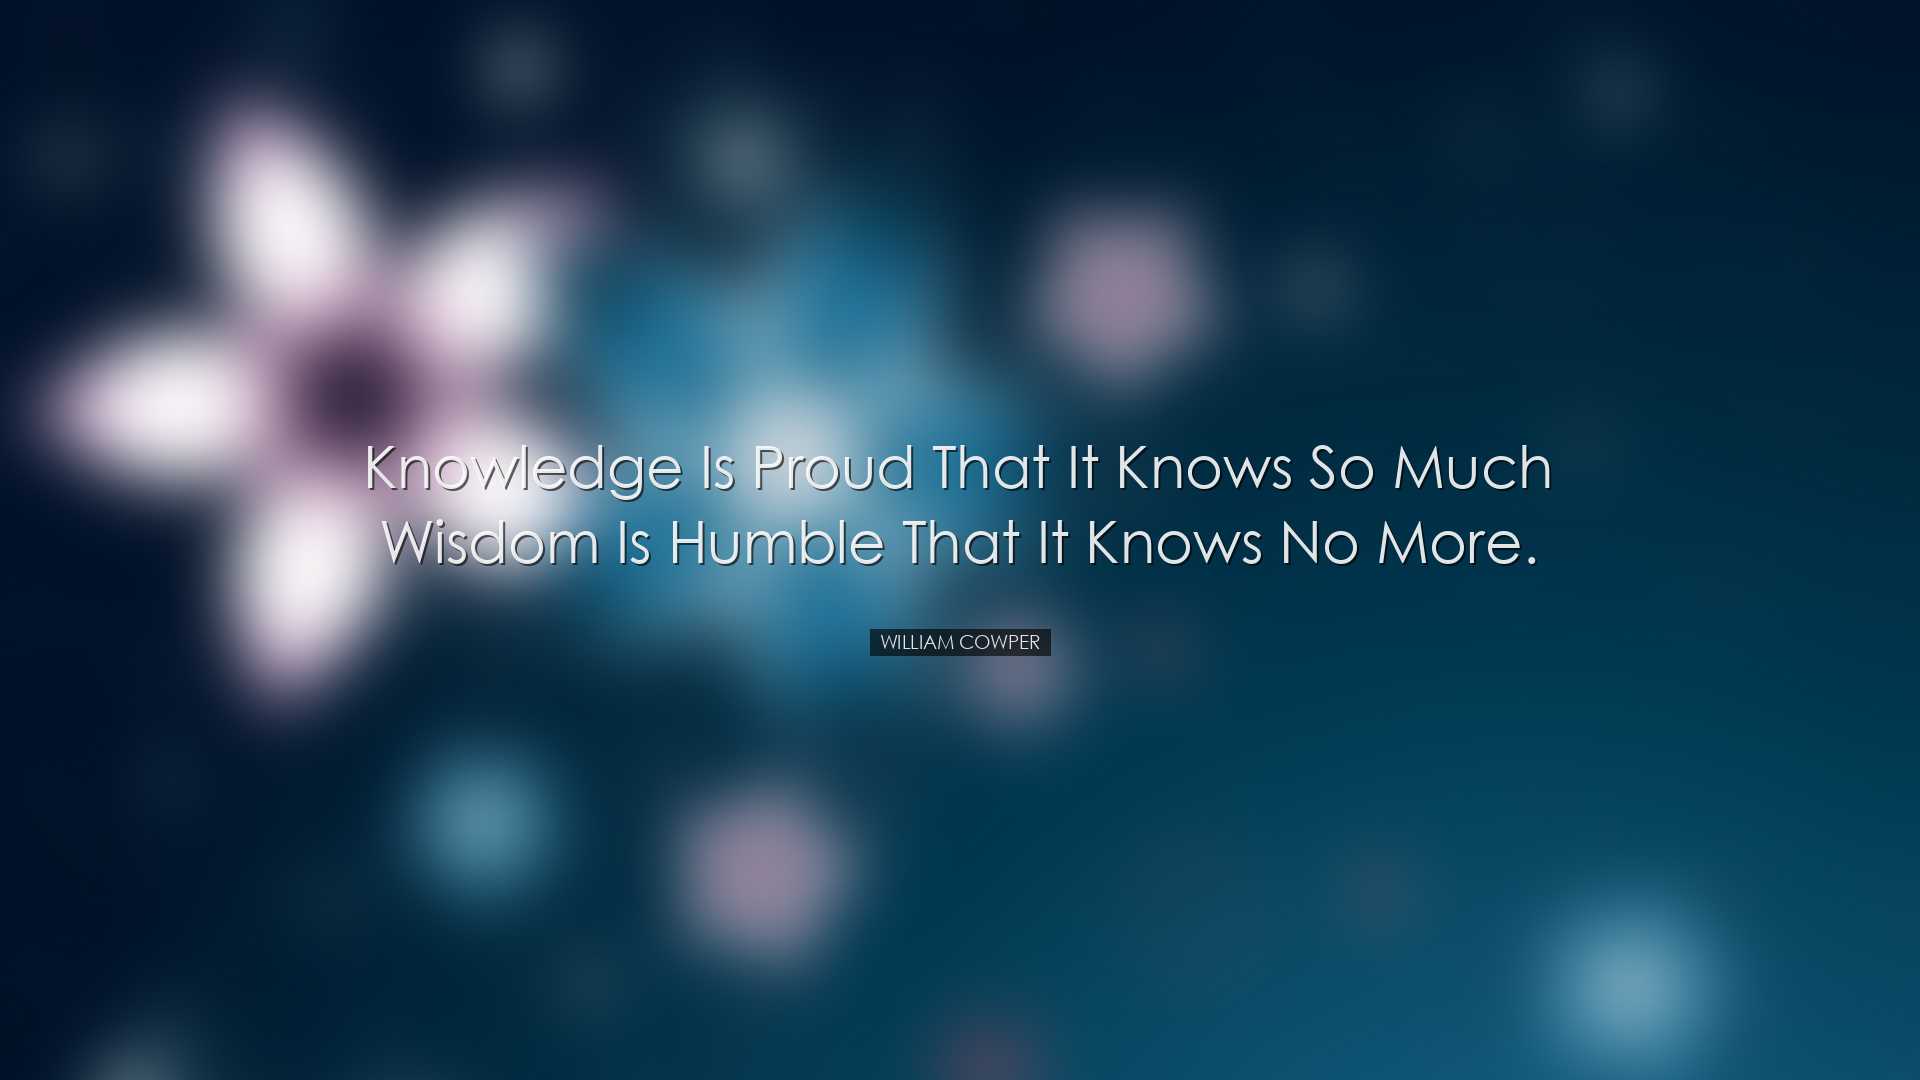 Knowledge is proud that it knows so much wisdom is humble that it